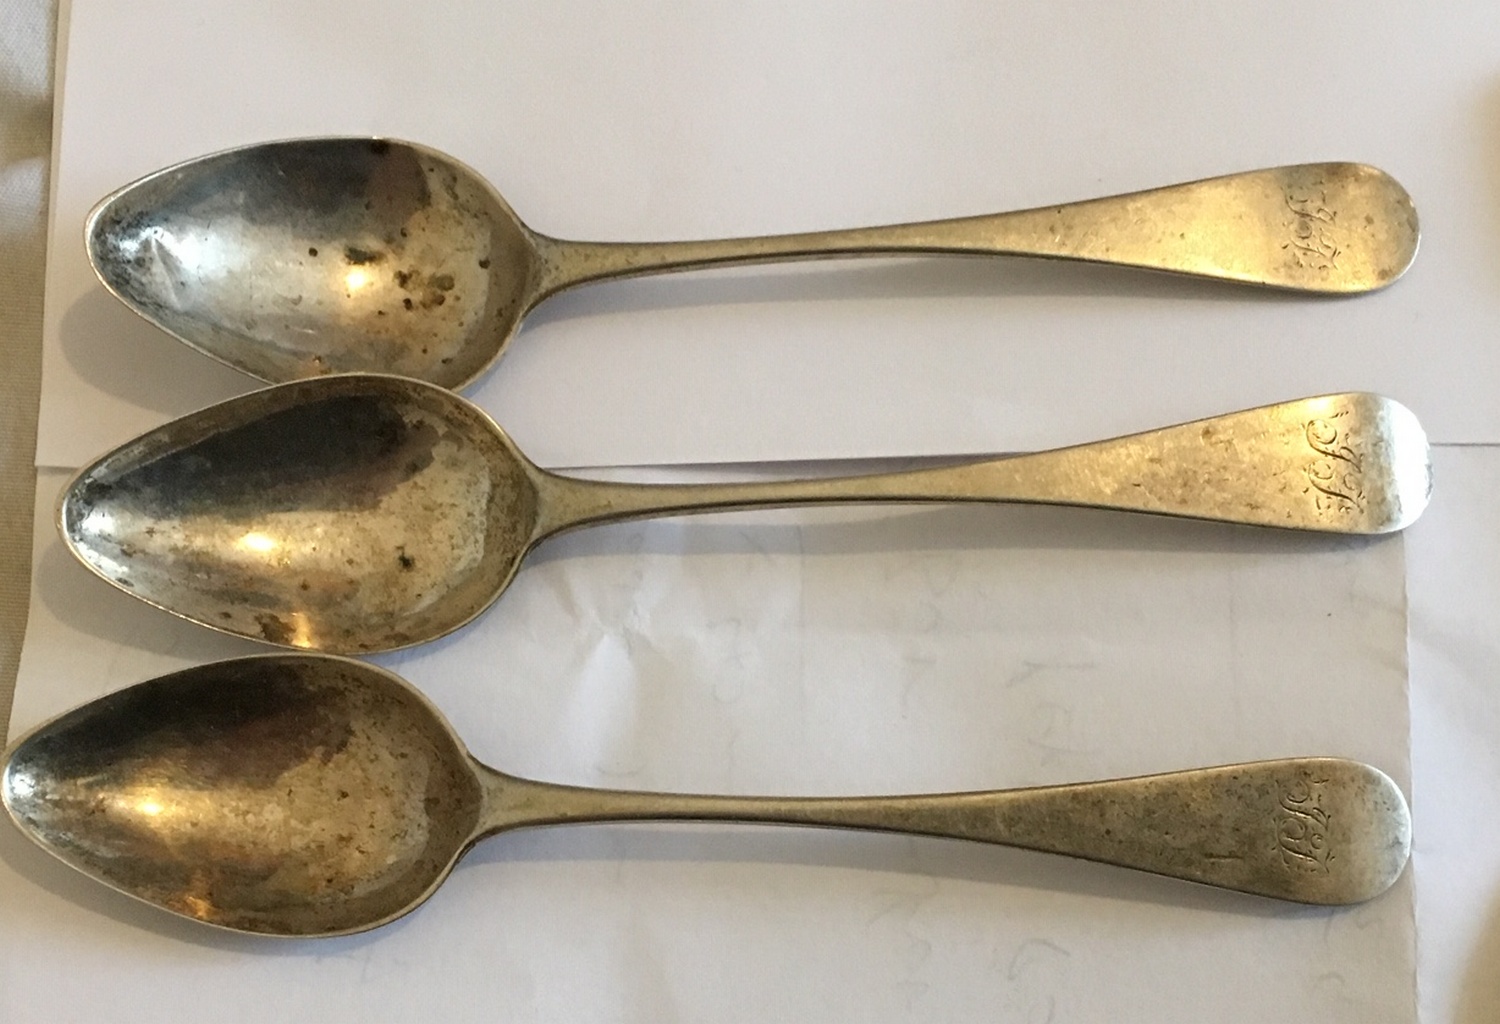 Lot of some 600 grams of Antique/Vintage Silver Spoons and White Metal Forks? - Image 7 of 16